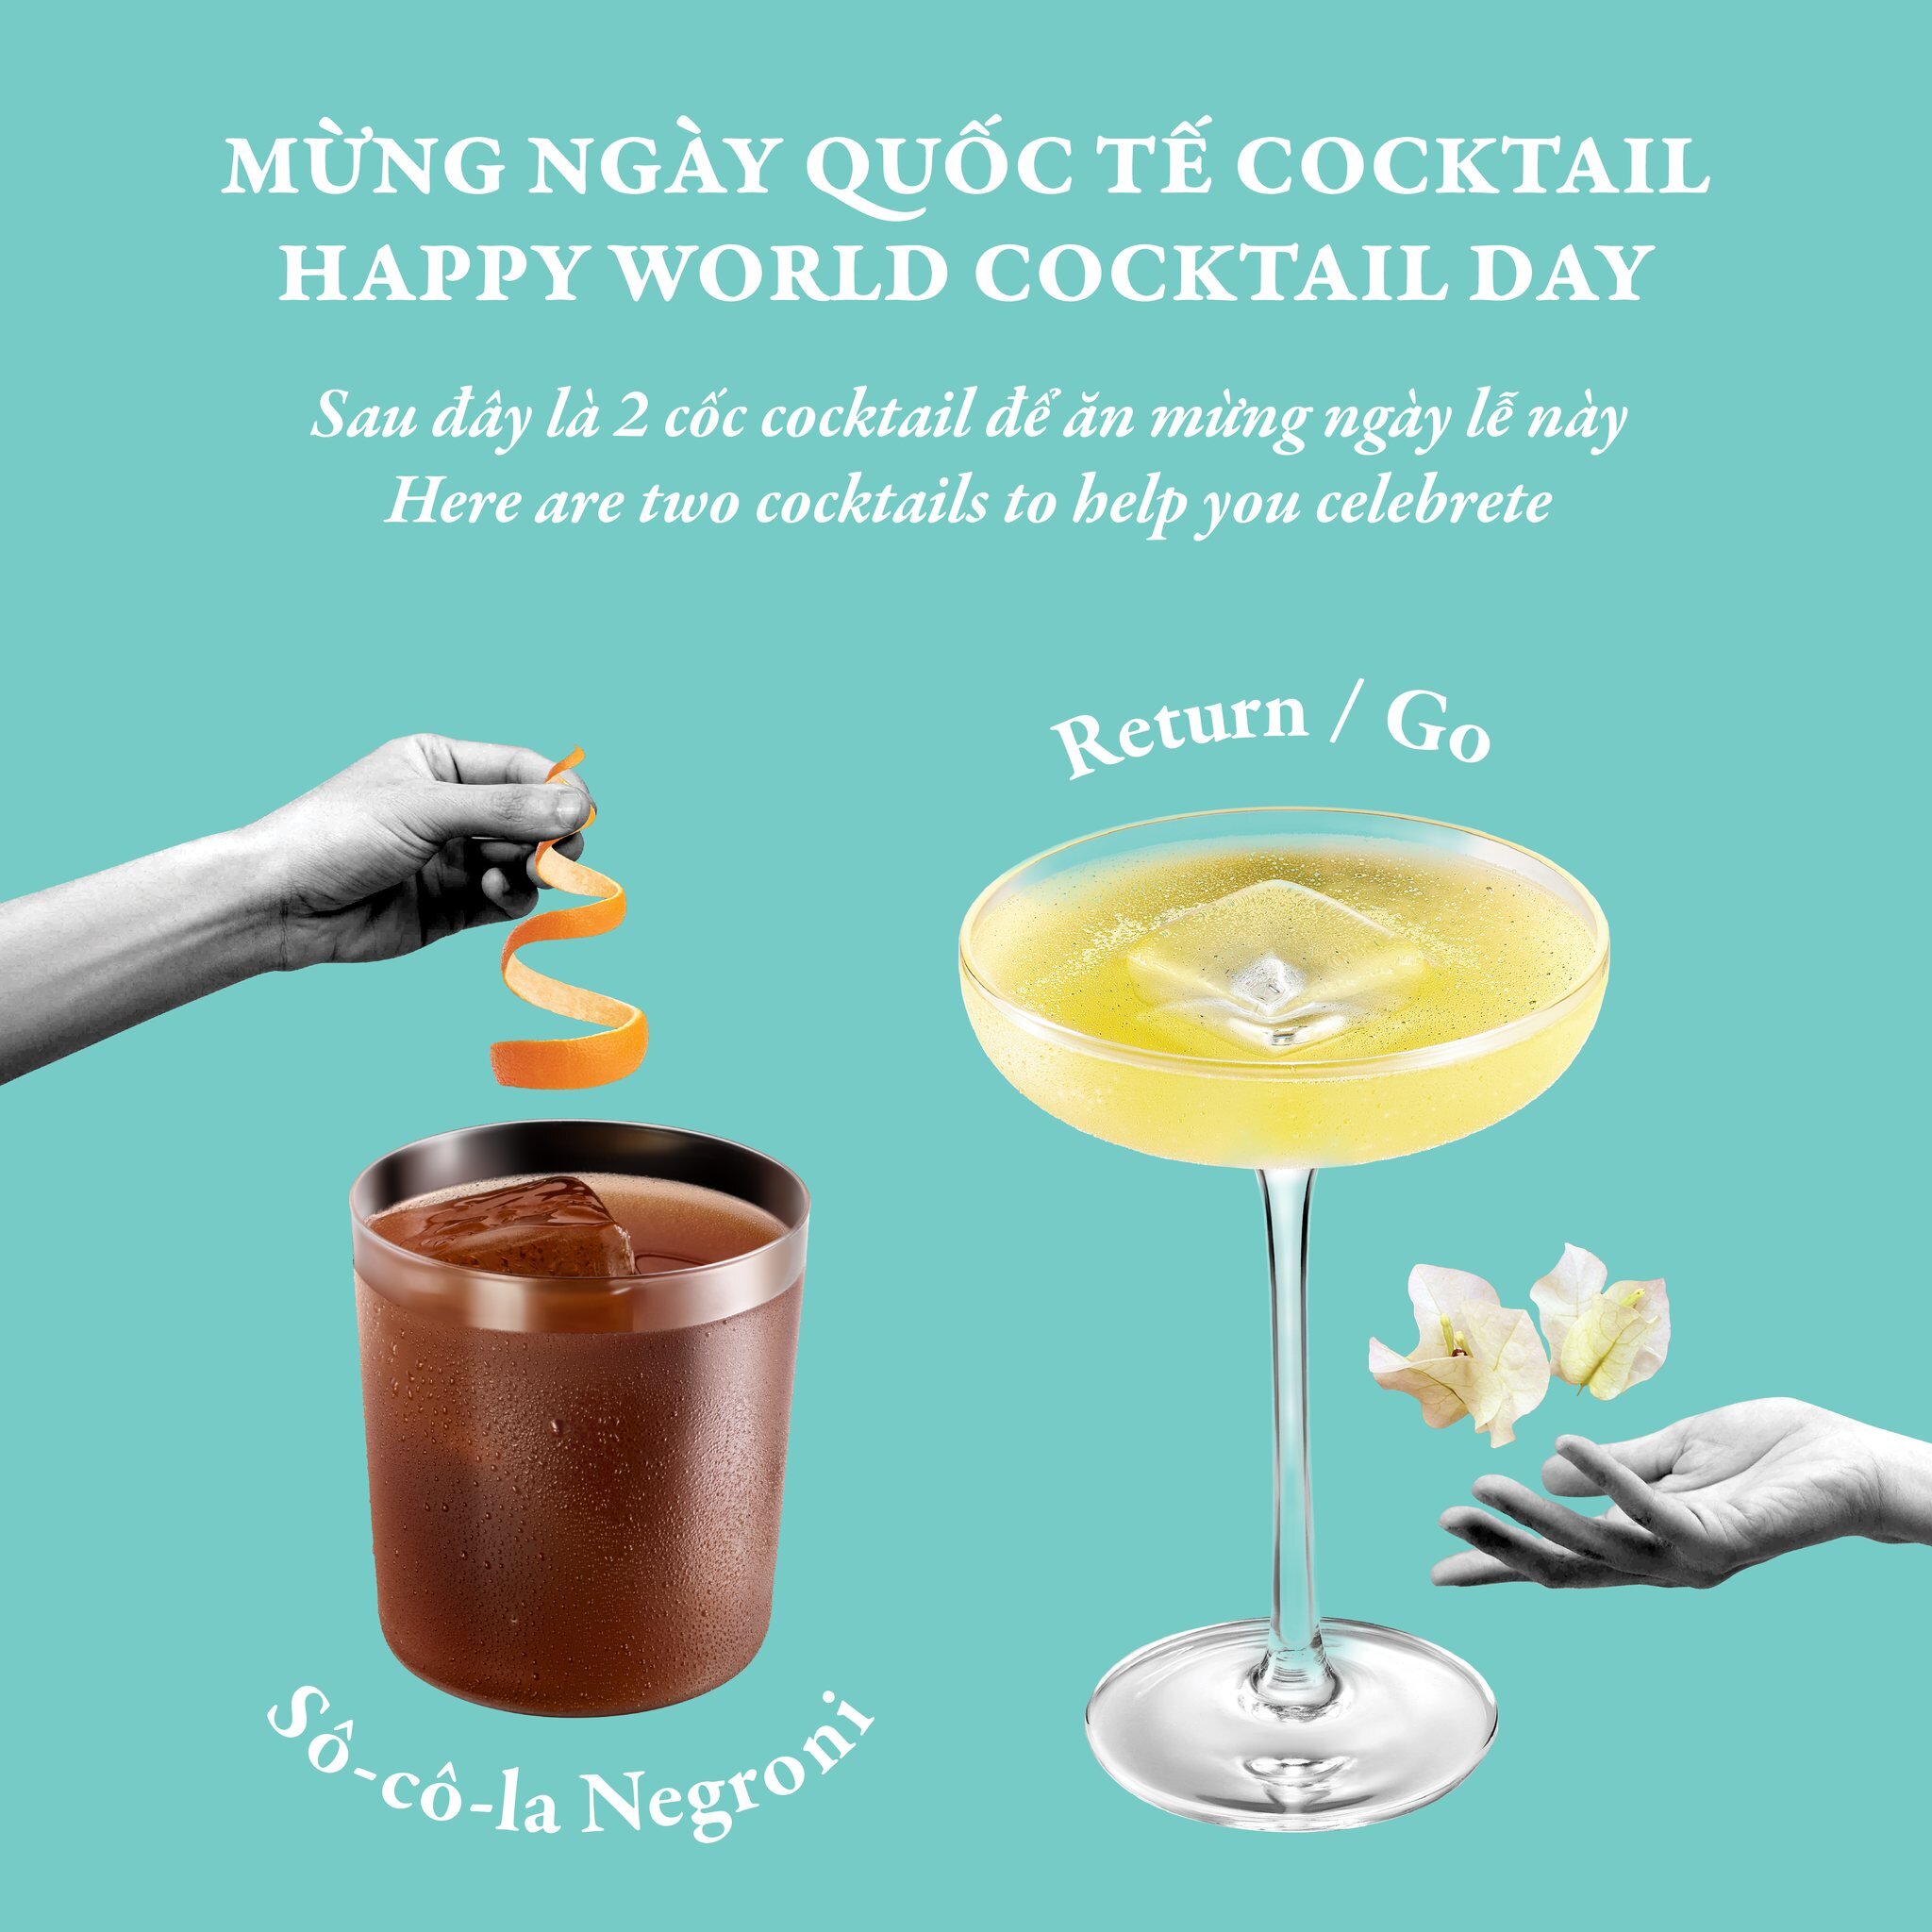 In honor of World Cocktail Day, we want to bring you two original cocktail recipes, created exclusively for Về Để Đi, to get you in the mood to celebrate.

RETURN/GO:
Good Gin: 15ml
St Germain: 15ml
Suze: 15ml
Fino Sherry: 15ml
Champagne: Top up
Meth